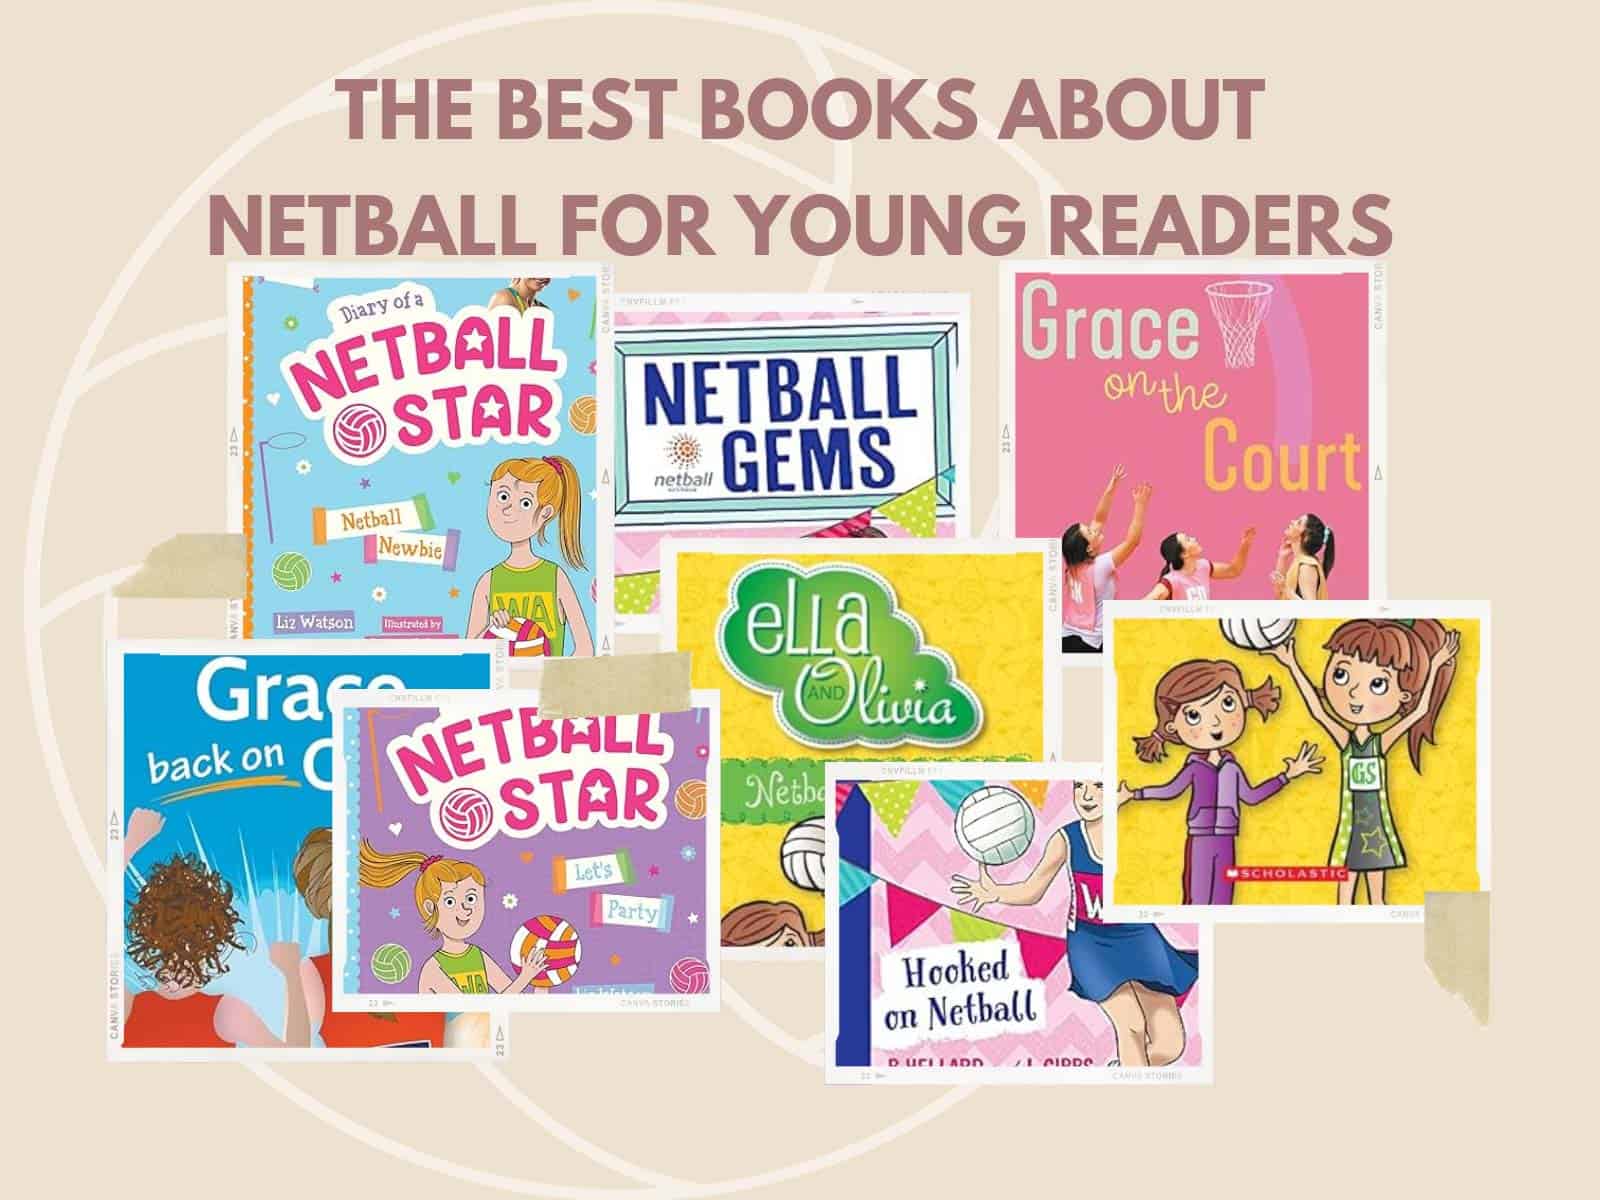 The best books about netball for young readers blog post showing various bright coloured netball books for junior readers in fiction